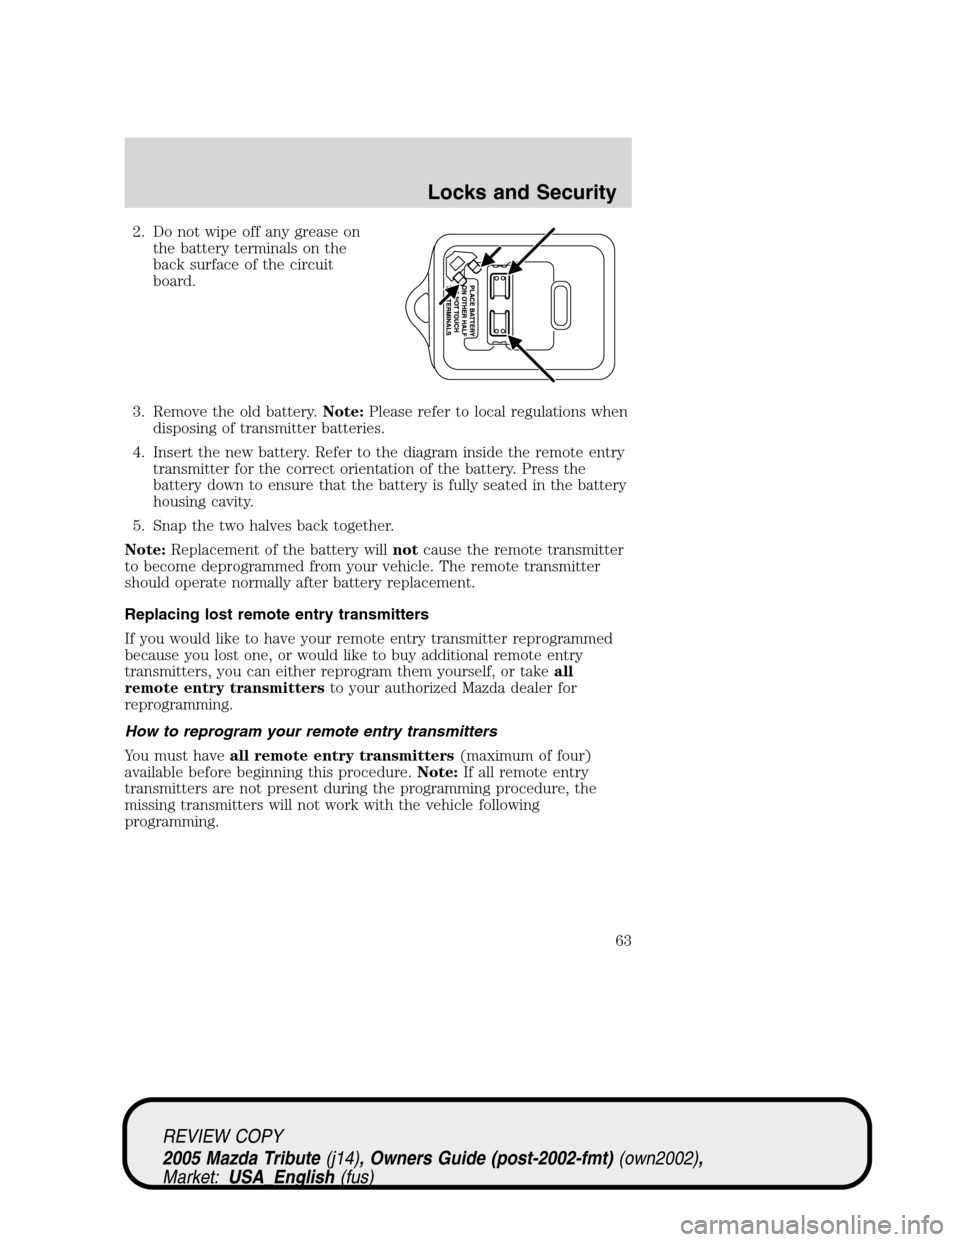 MAZDA MODEL TRIBUTE 2005  Owners Manual (in English) 2. Do not wipe off any grease on
the battery terminals on the
back surface of the circuit
board.
3. Remove the old battery.Note:Please refer to local regulations when
disposing of transmitter batterie